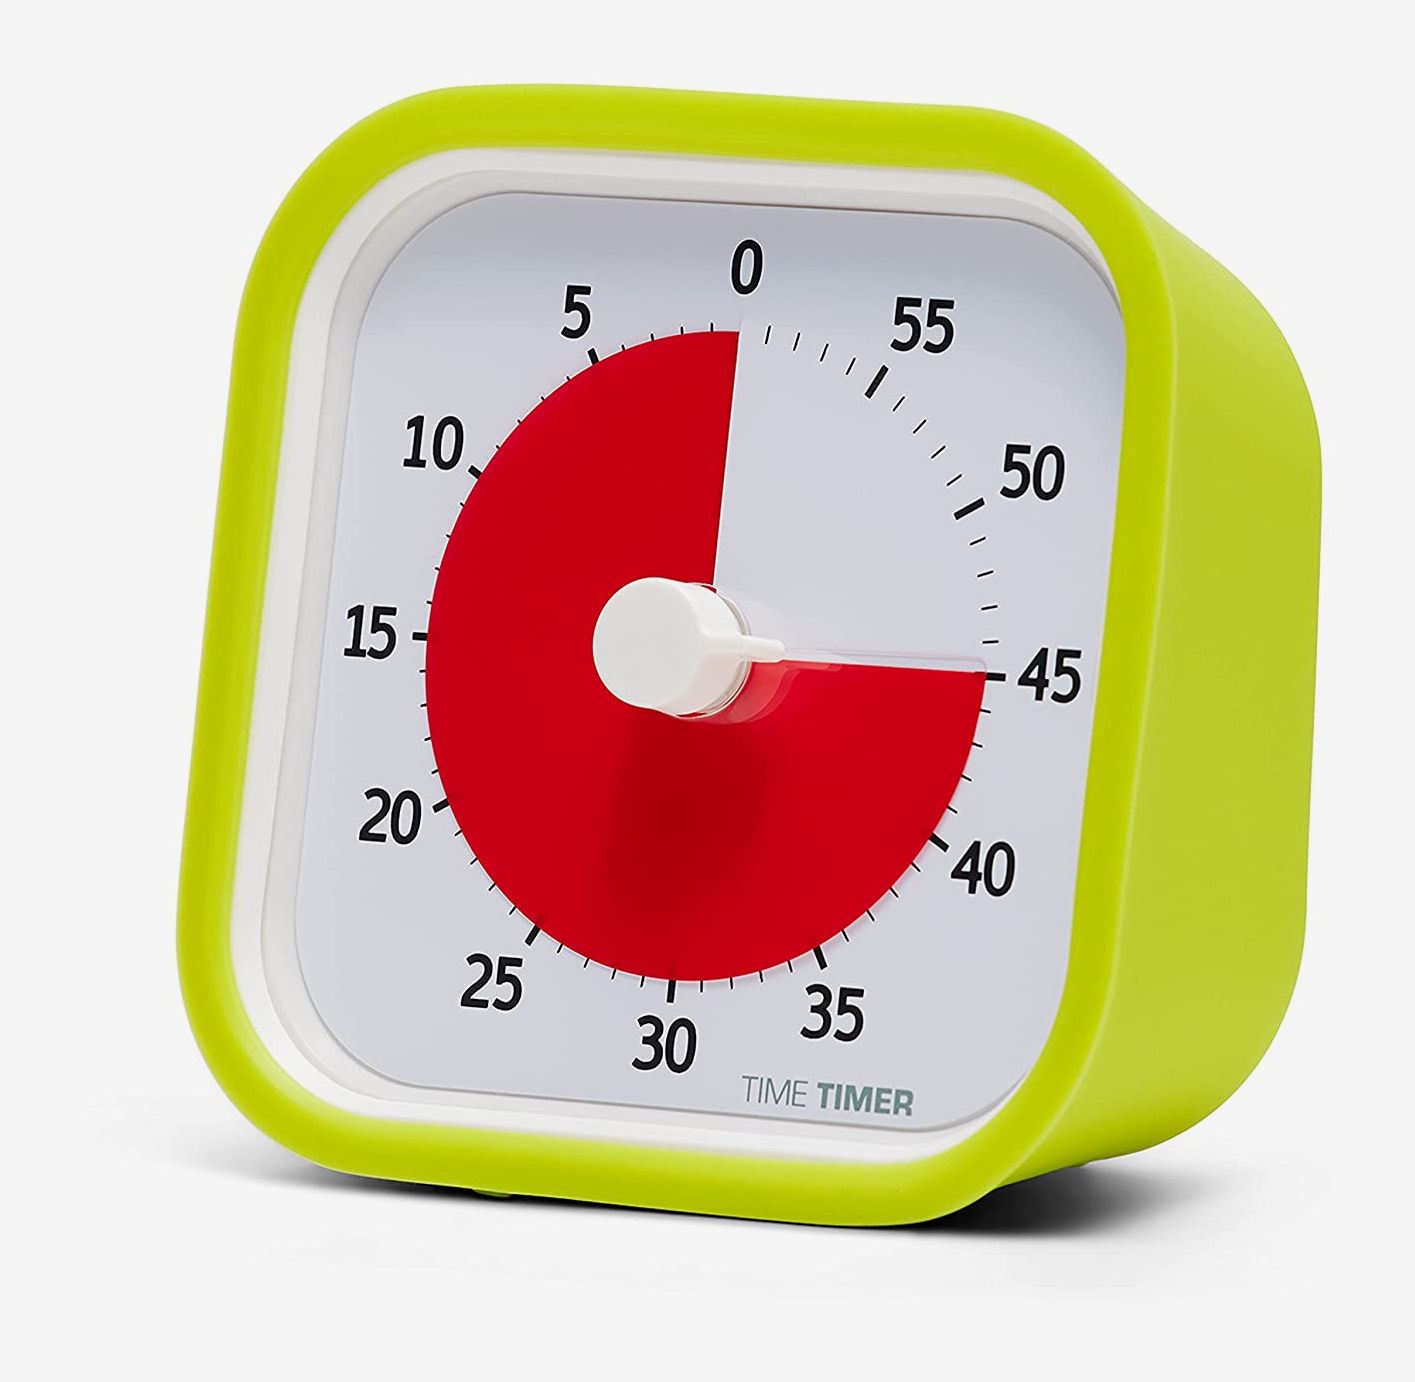 10 Best Visual Timers for Kids for Home or Classroom